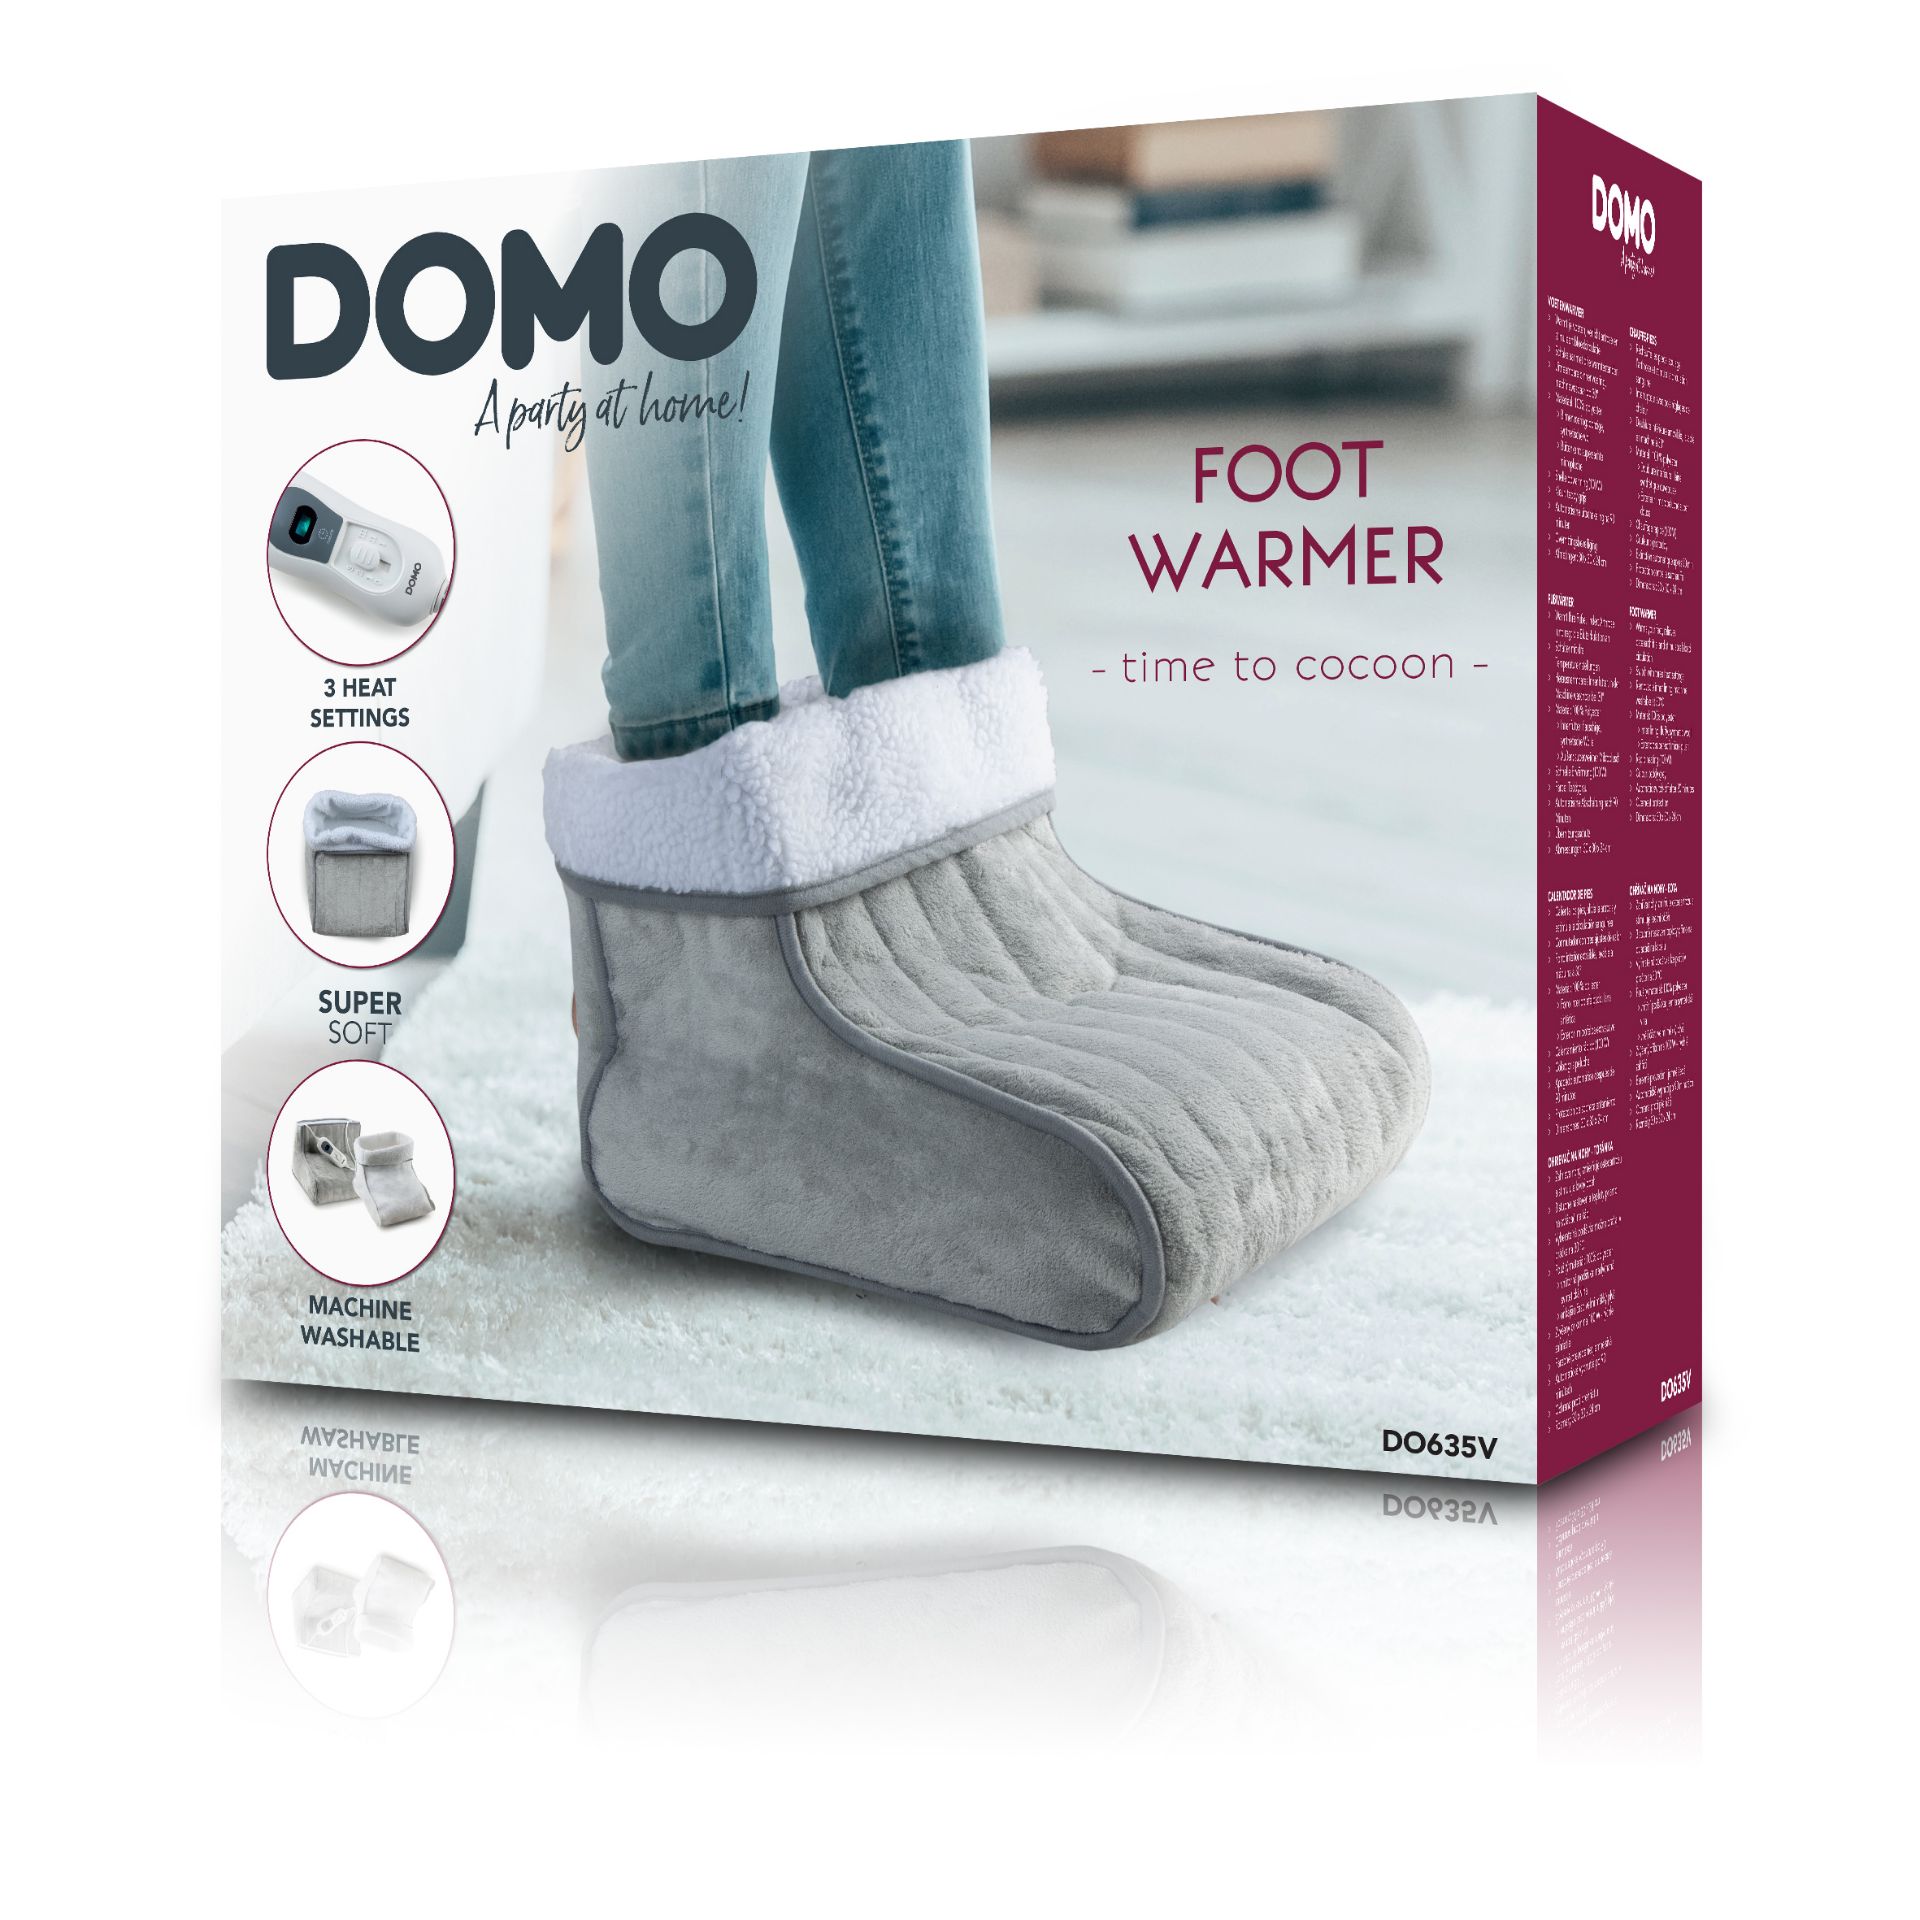 10 x DOMO Twin Super Soft Foot Warmers RRP £ 50 each